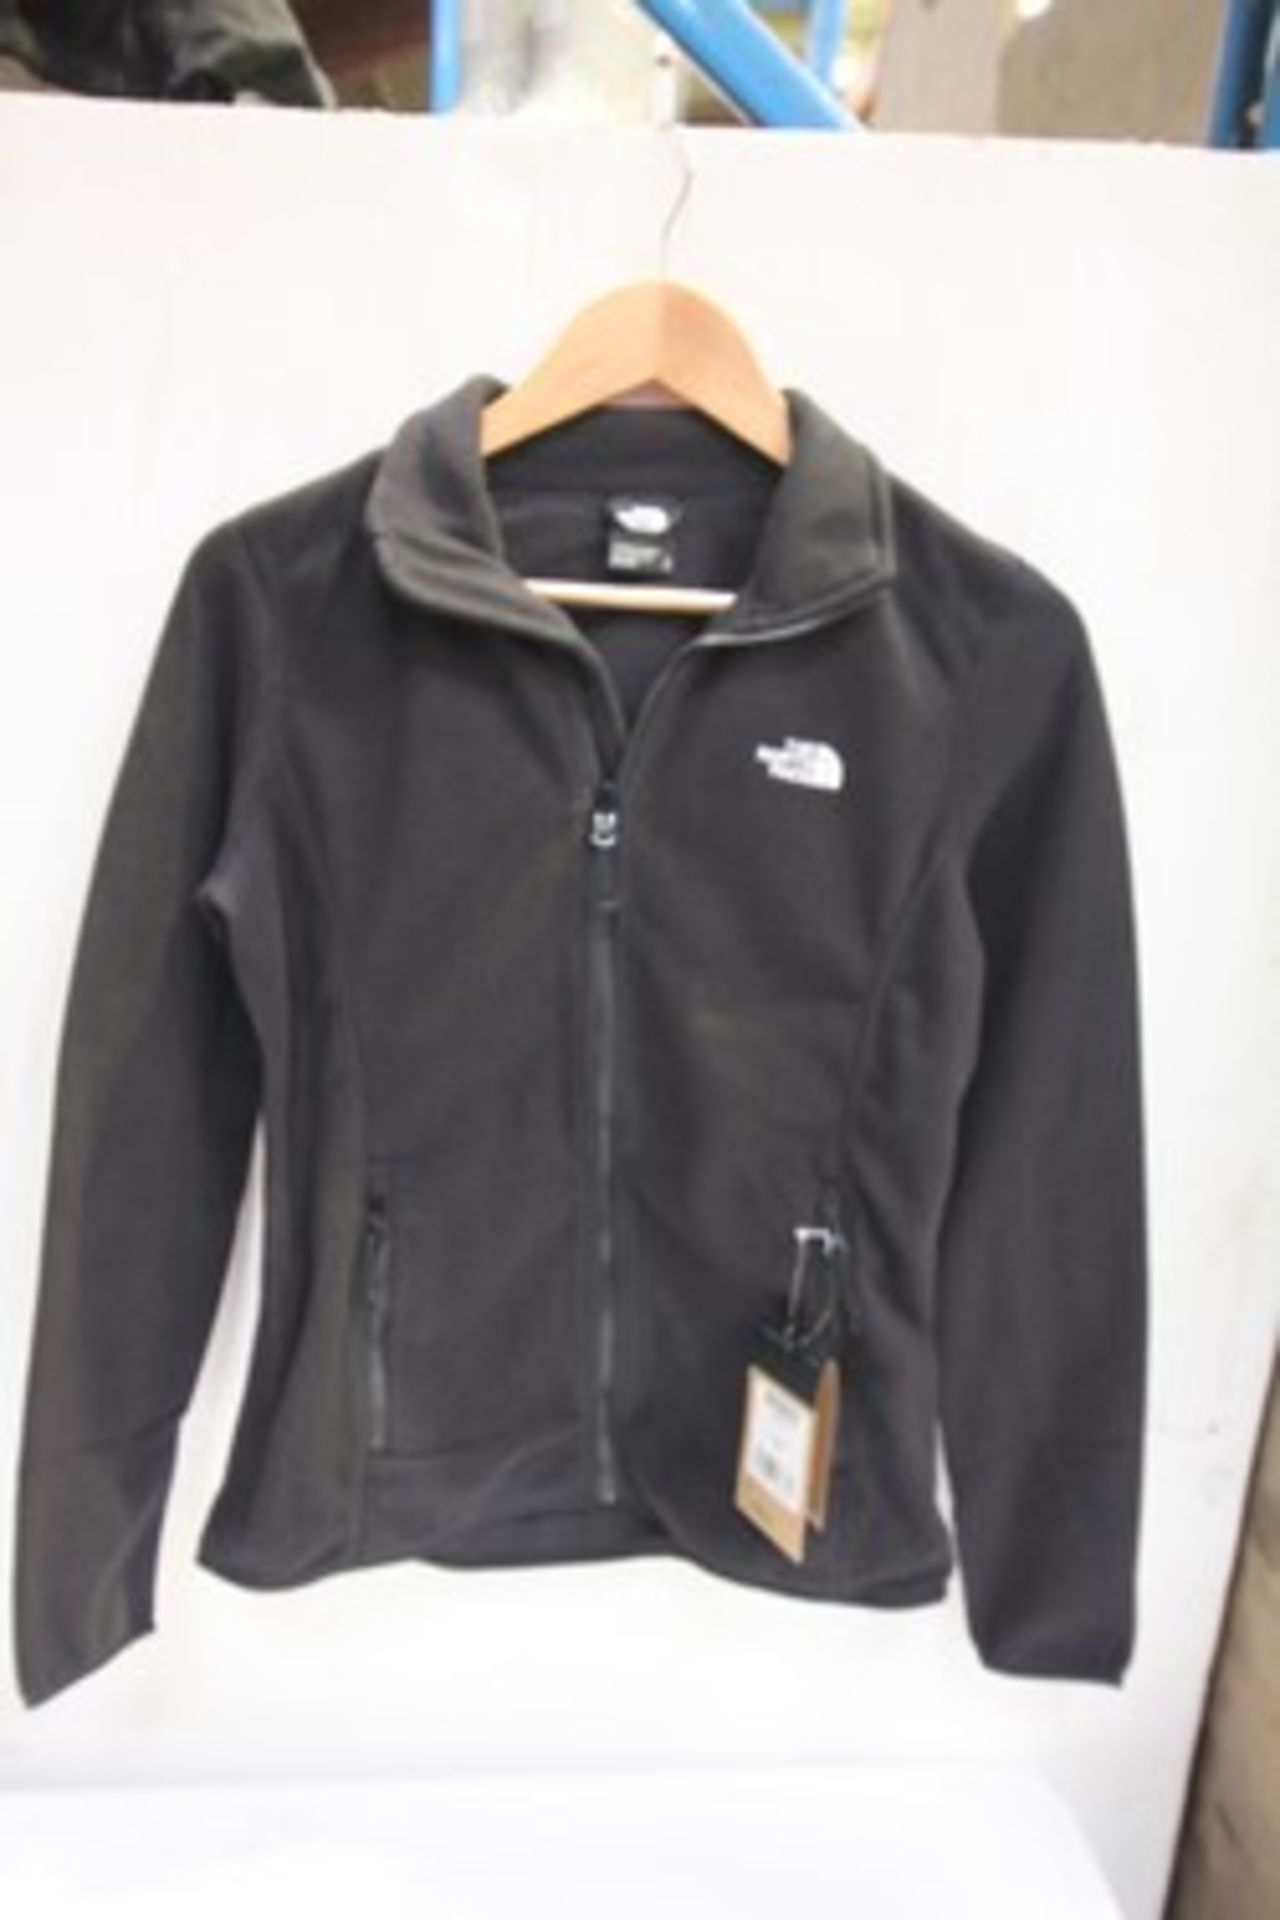 3 x North Face black zip up jackets, size small, style Glazier - New in pack (E1A)